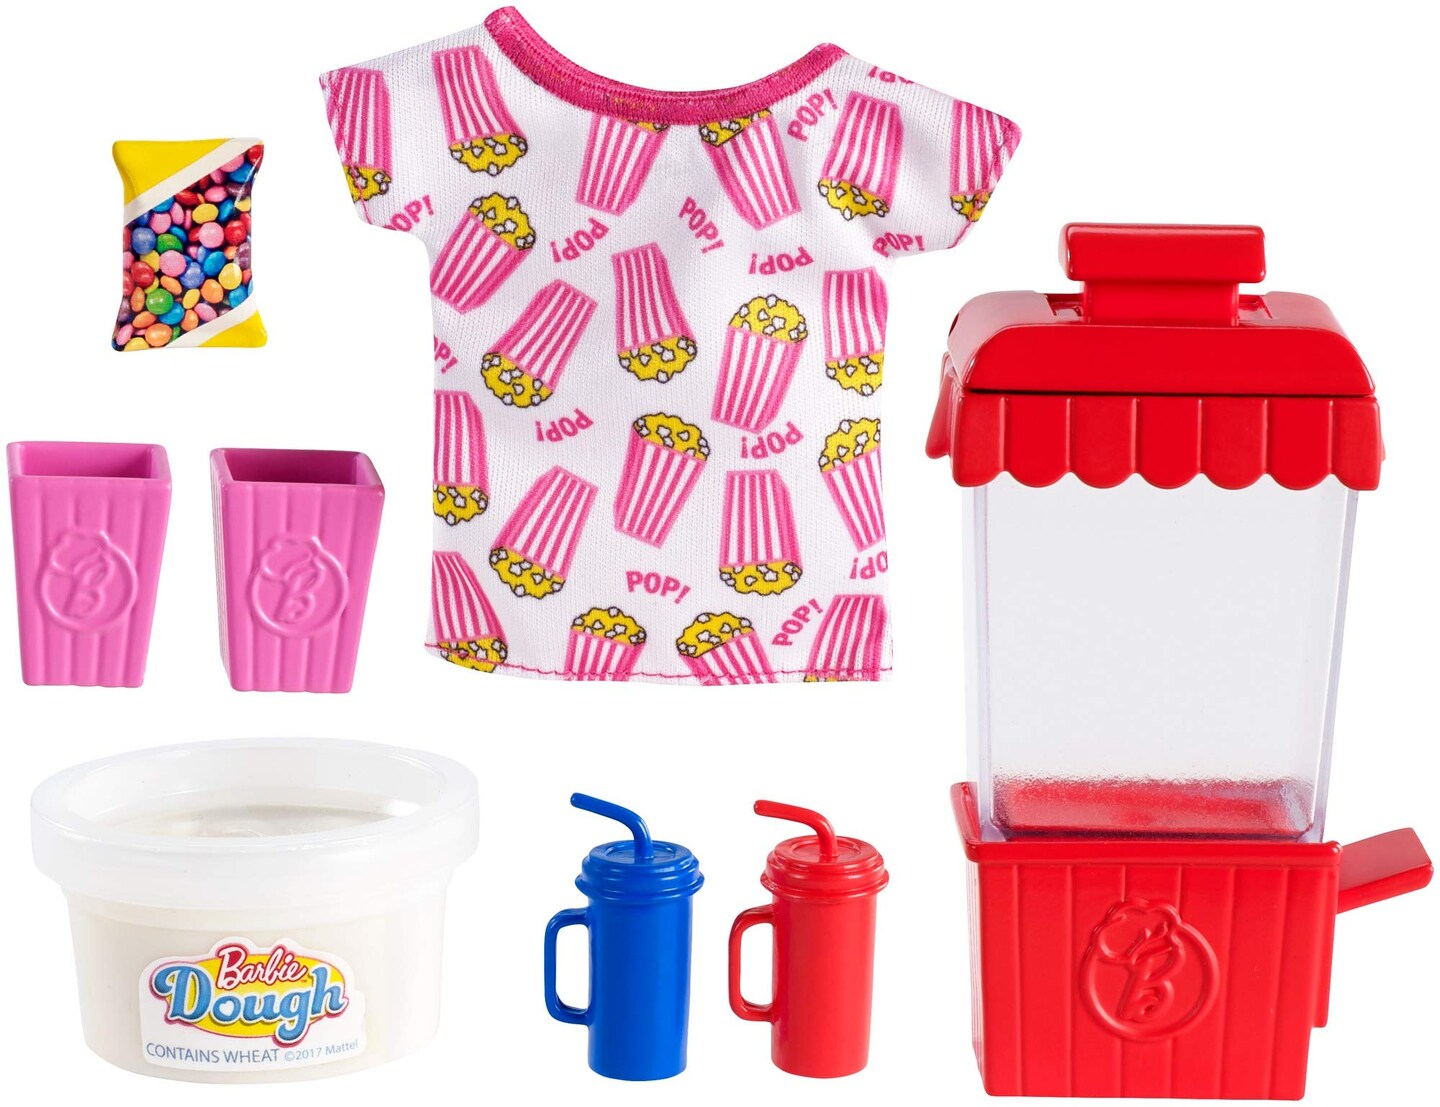 Barbie Cooking &#x26; Baking Accessory Pack with Popcorn-Themed Pieces, Including T-Shirt for Doll, Popcorn Machine Mold &#x26; Container of Molded Dough, Ages 4 Years Old &#x26; Up, Multi